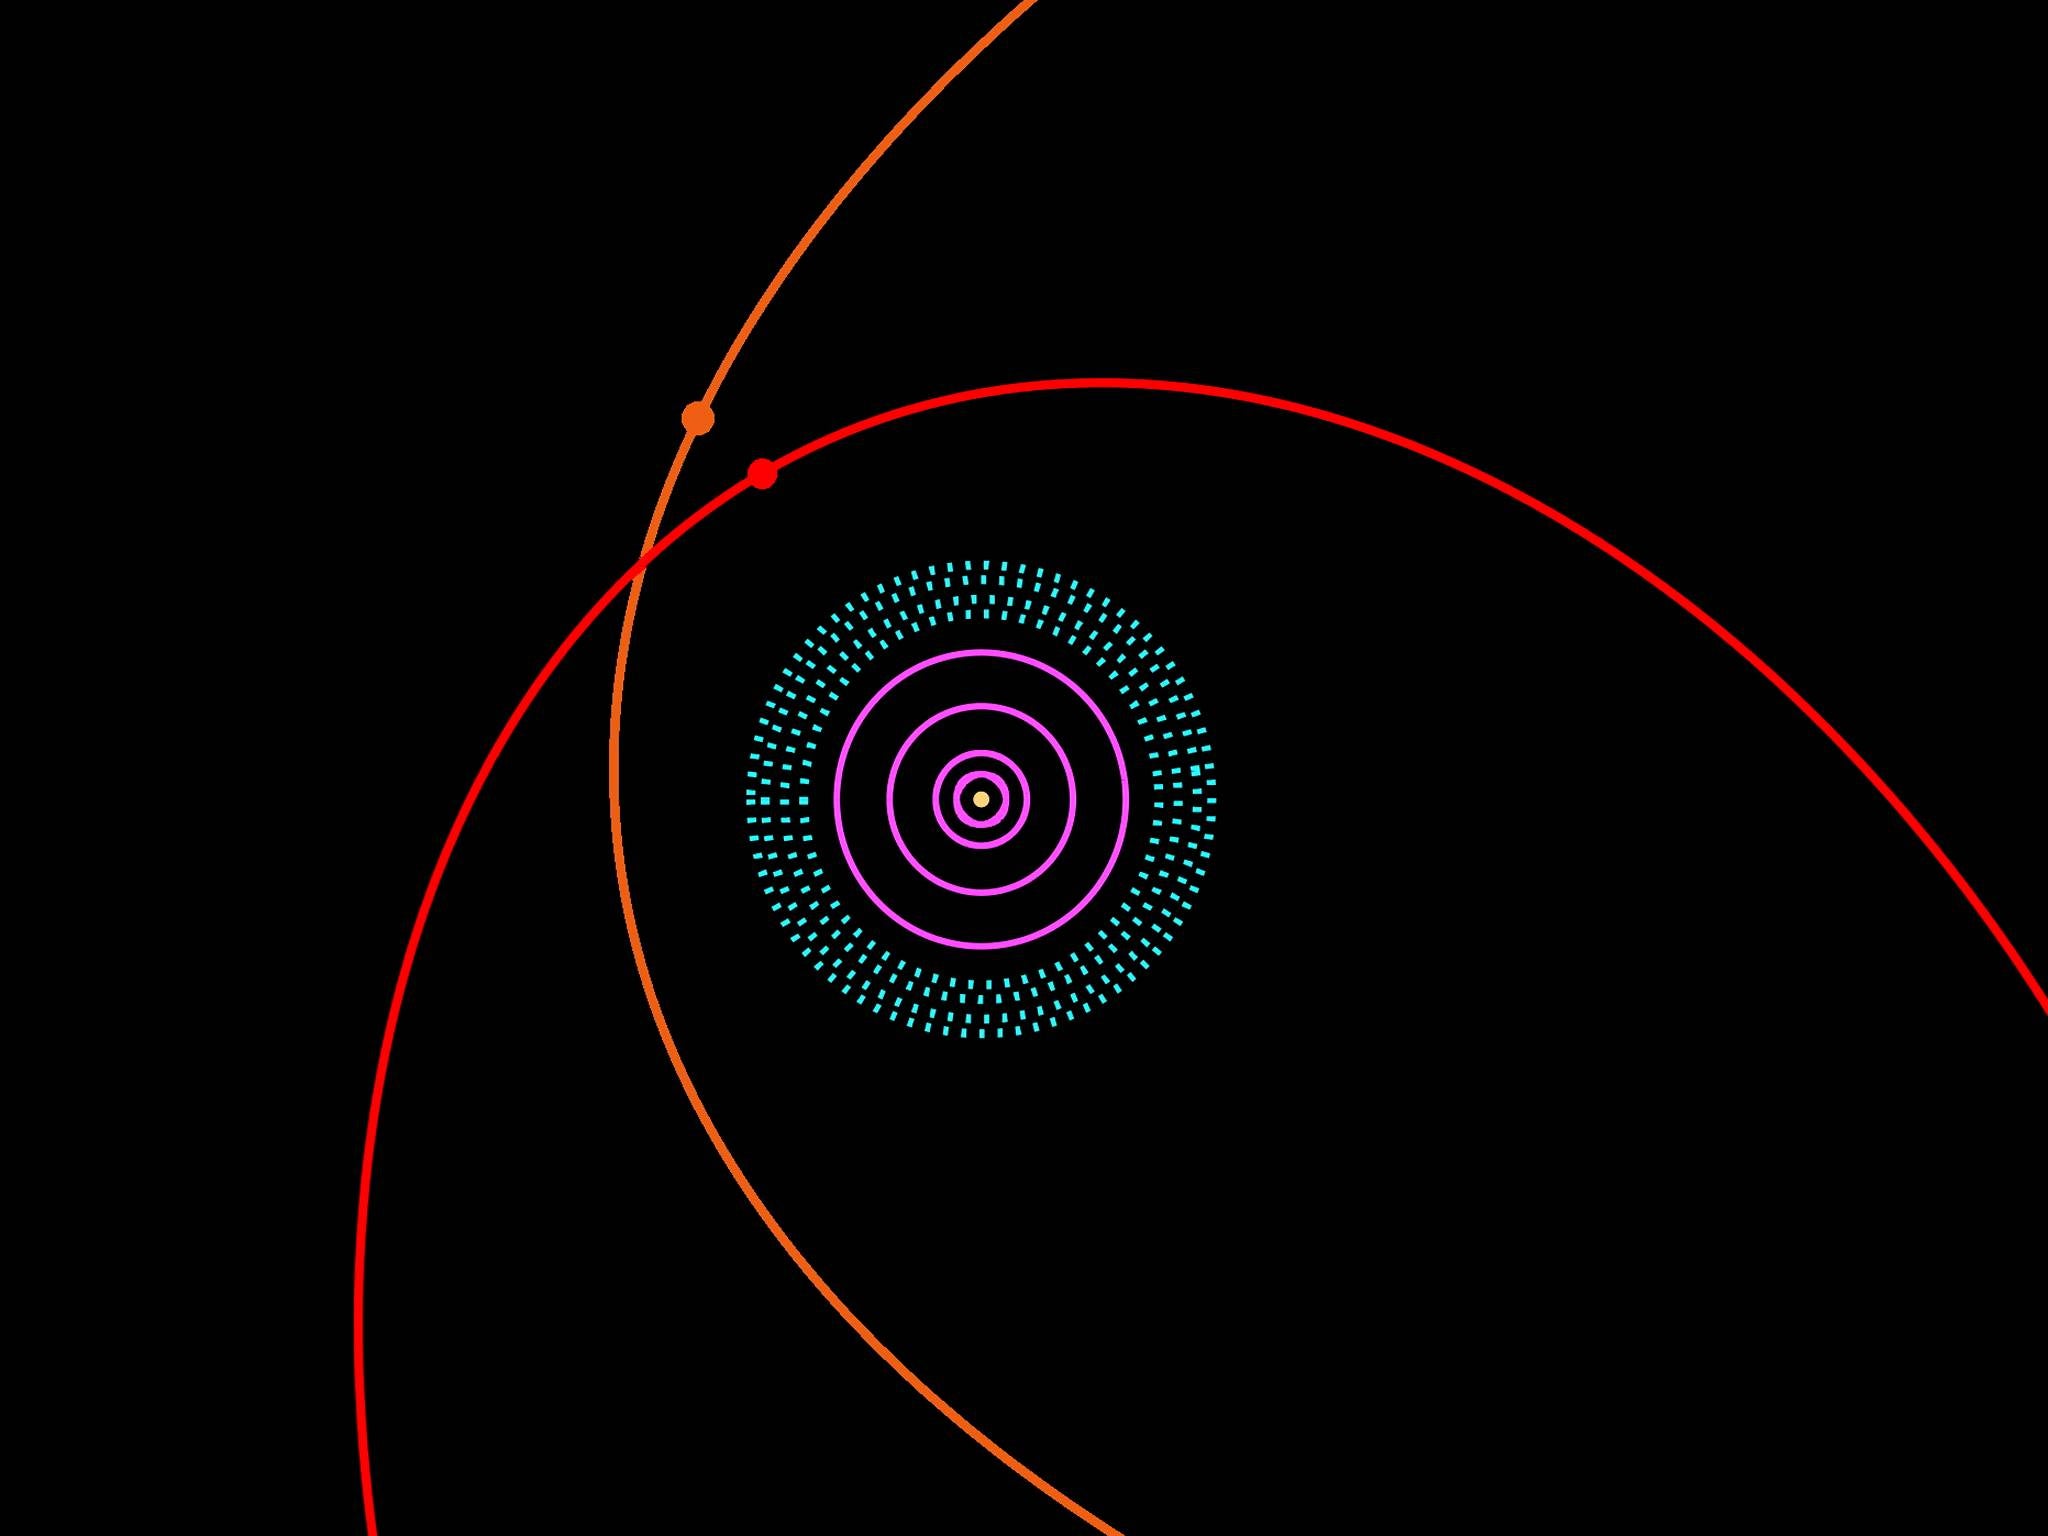 The orbits of 2012 VP113 (red) and Sedna (orange). The purple circles represent the orbits of the giant planets and the dotted blue region represents the Kuiper belt